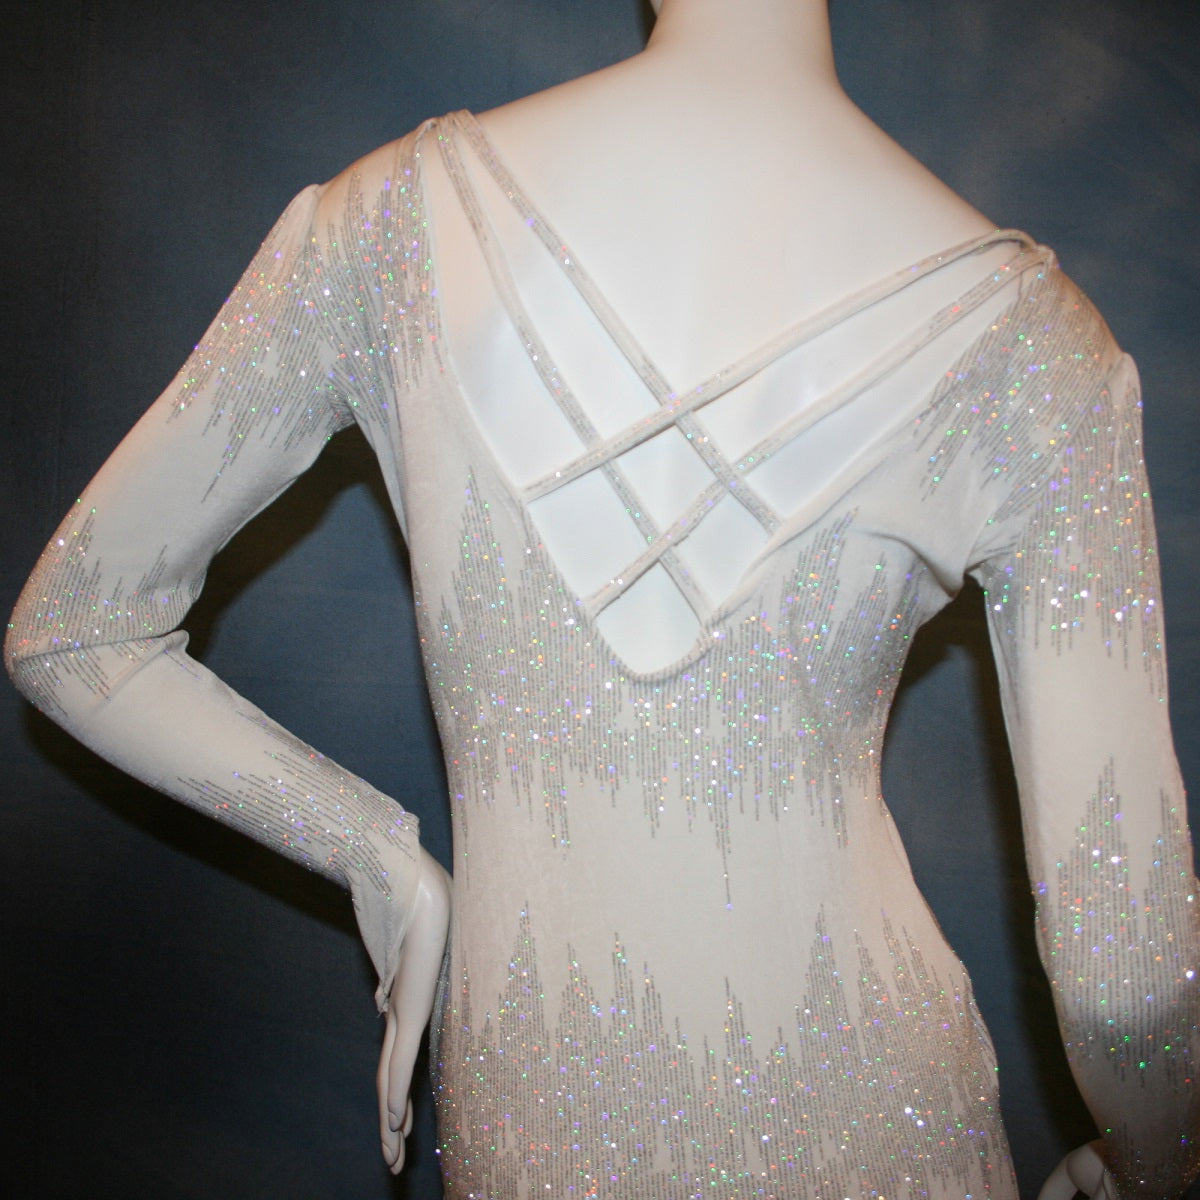 close up back view of White Latin/Rhythm dress created in glitter slinky with an awesome electrifying glitter pattern, features long sleeves, lattice strap details on back & a touch of Swarovski hand beading in the skirting.